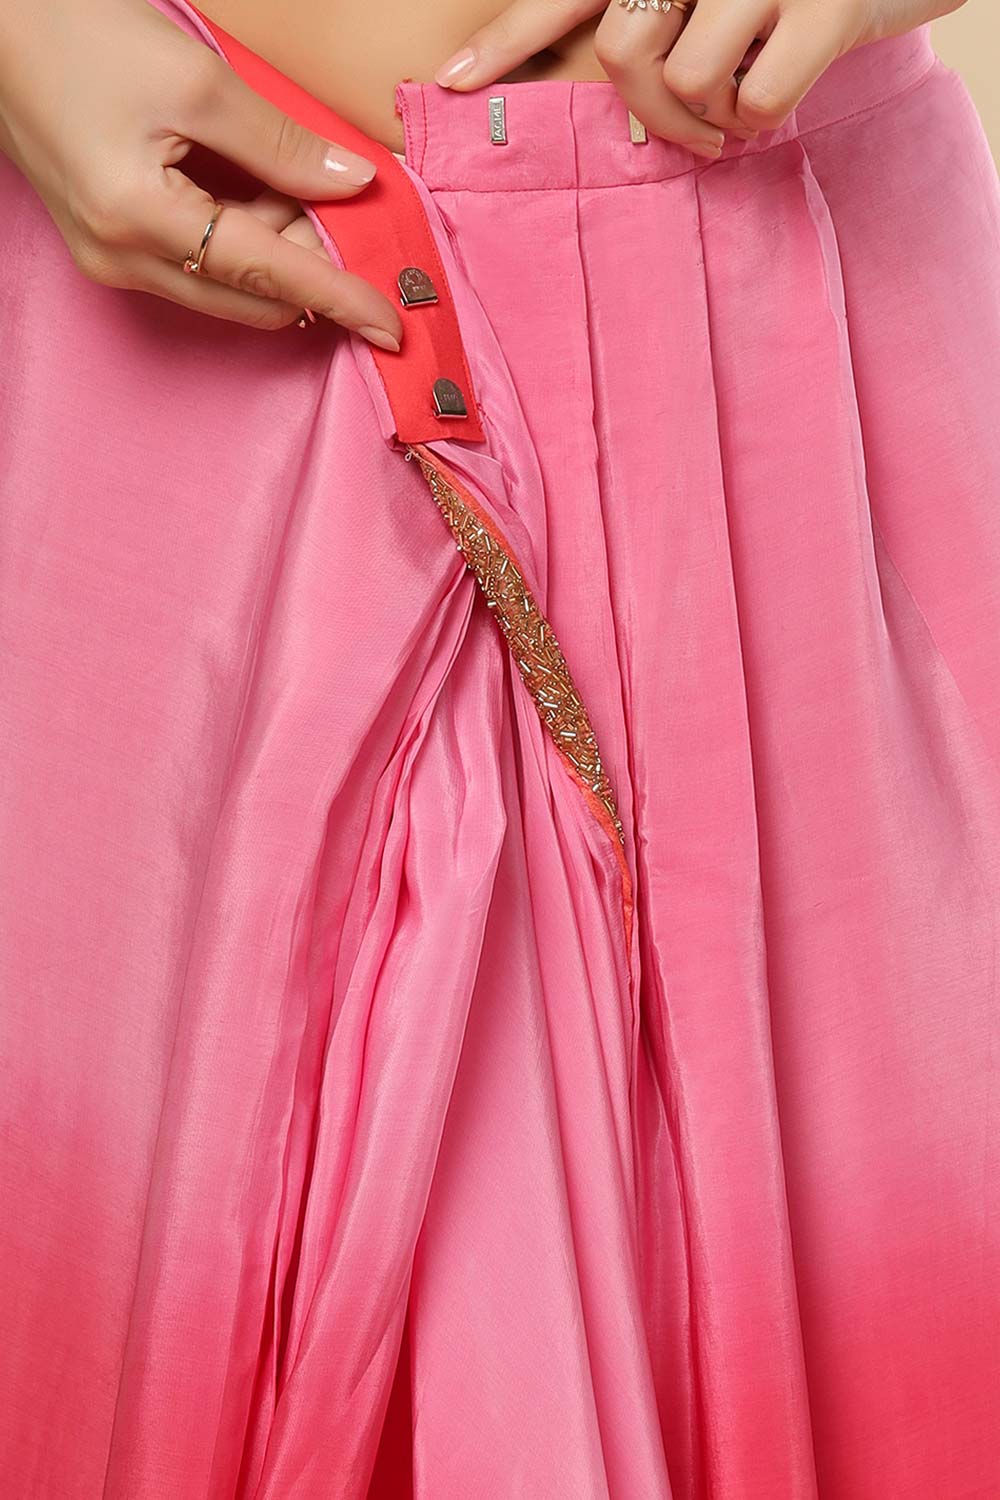 Chandini Pink & Orange Ombre Silk With Gold Sequins Border One Minute Saree